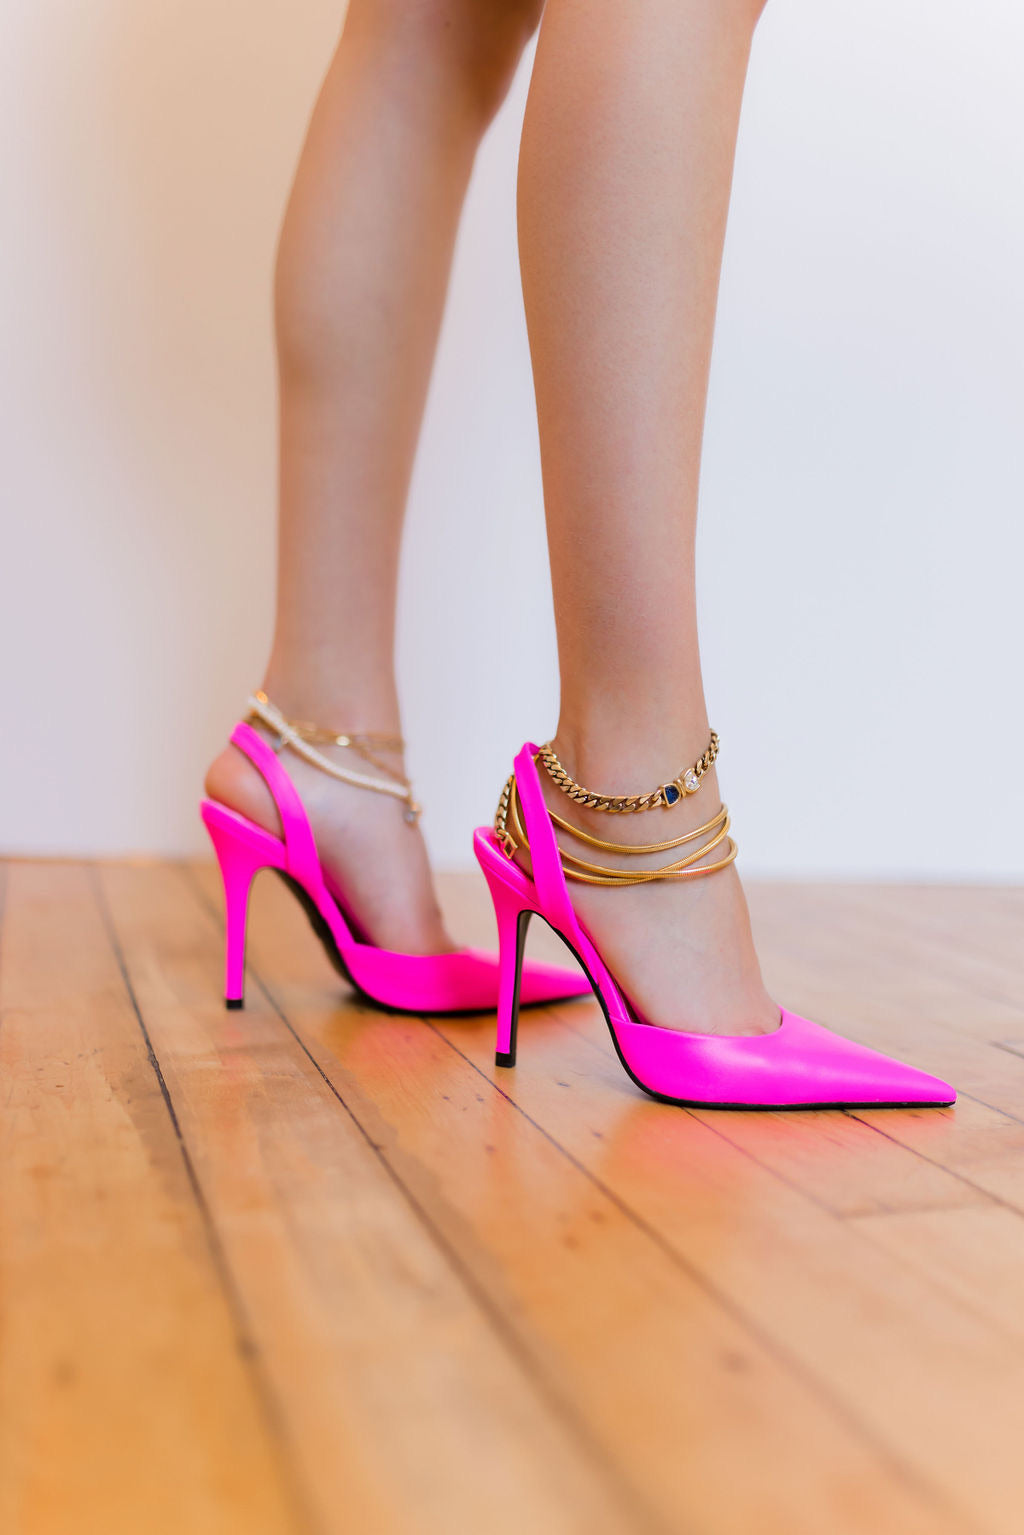 Bondeye Jewelry NYC jewelry brand model wearing pink heels and multiple gold anklets